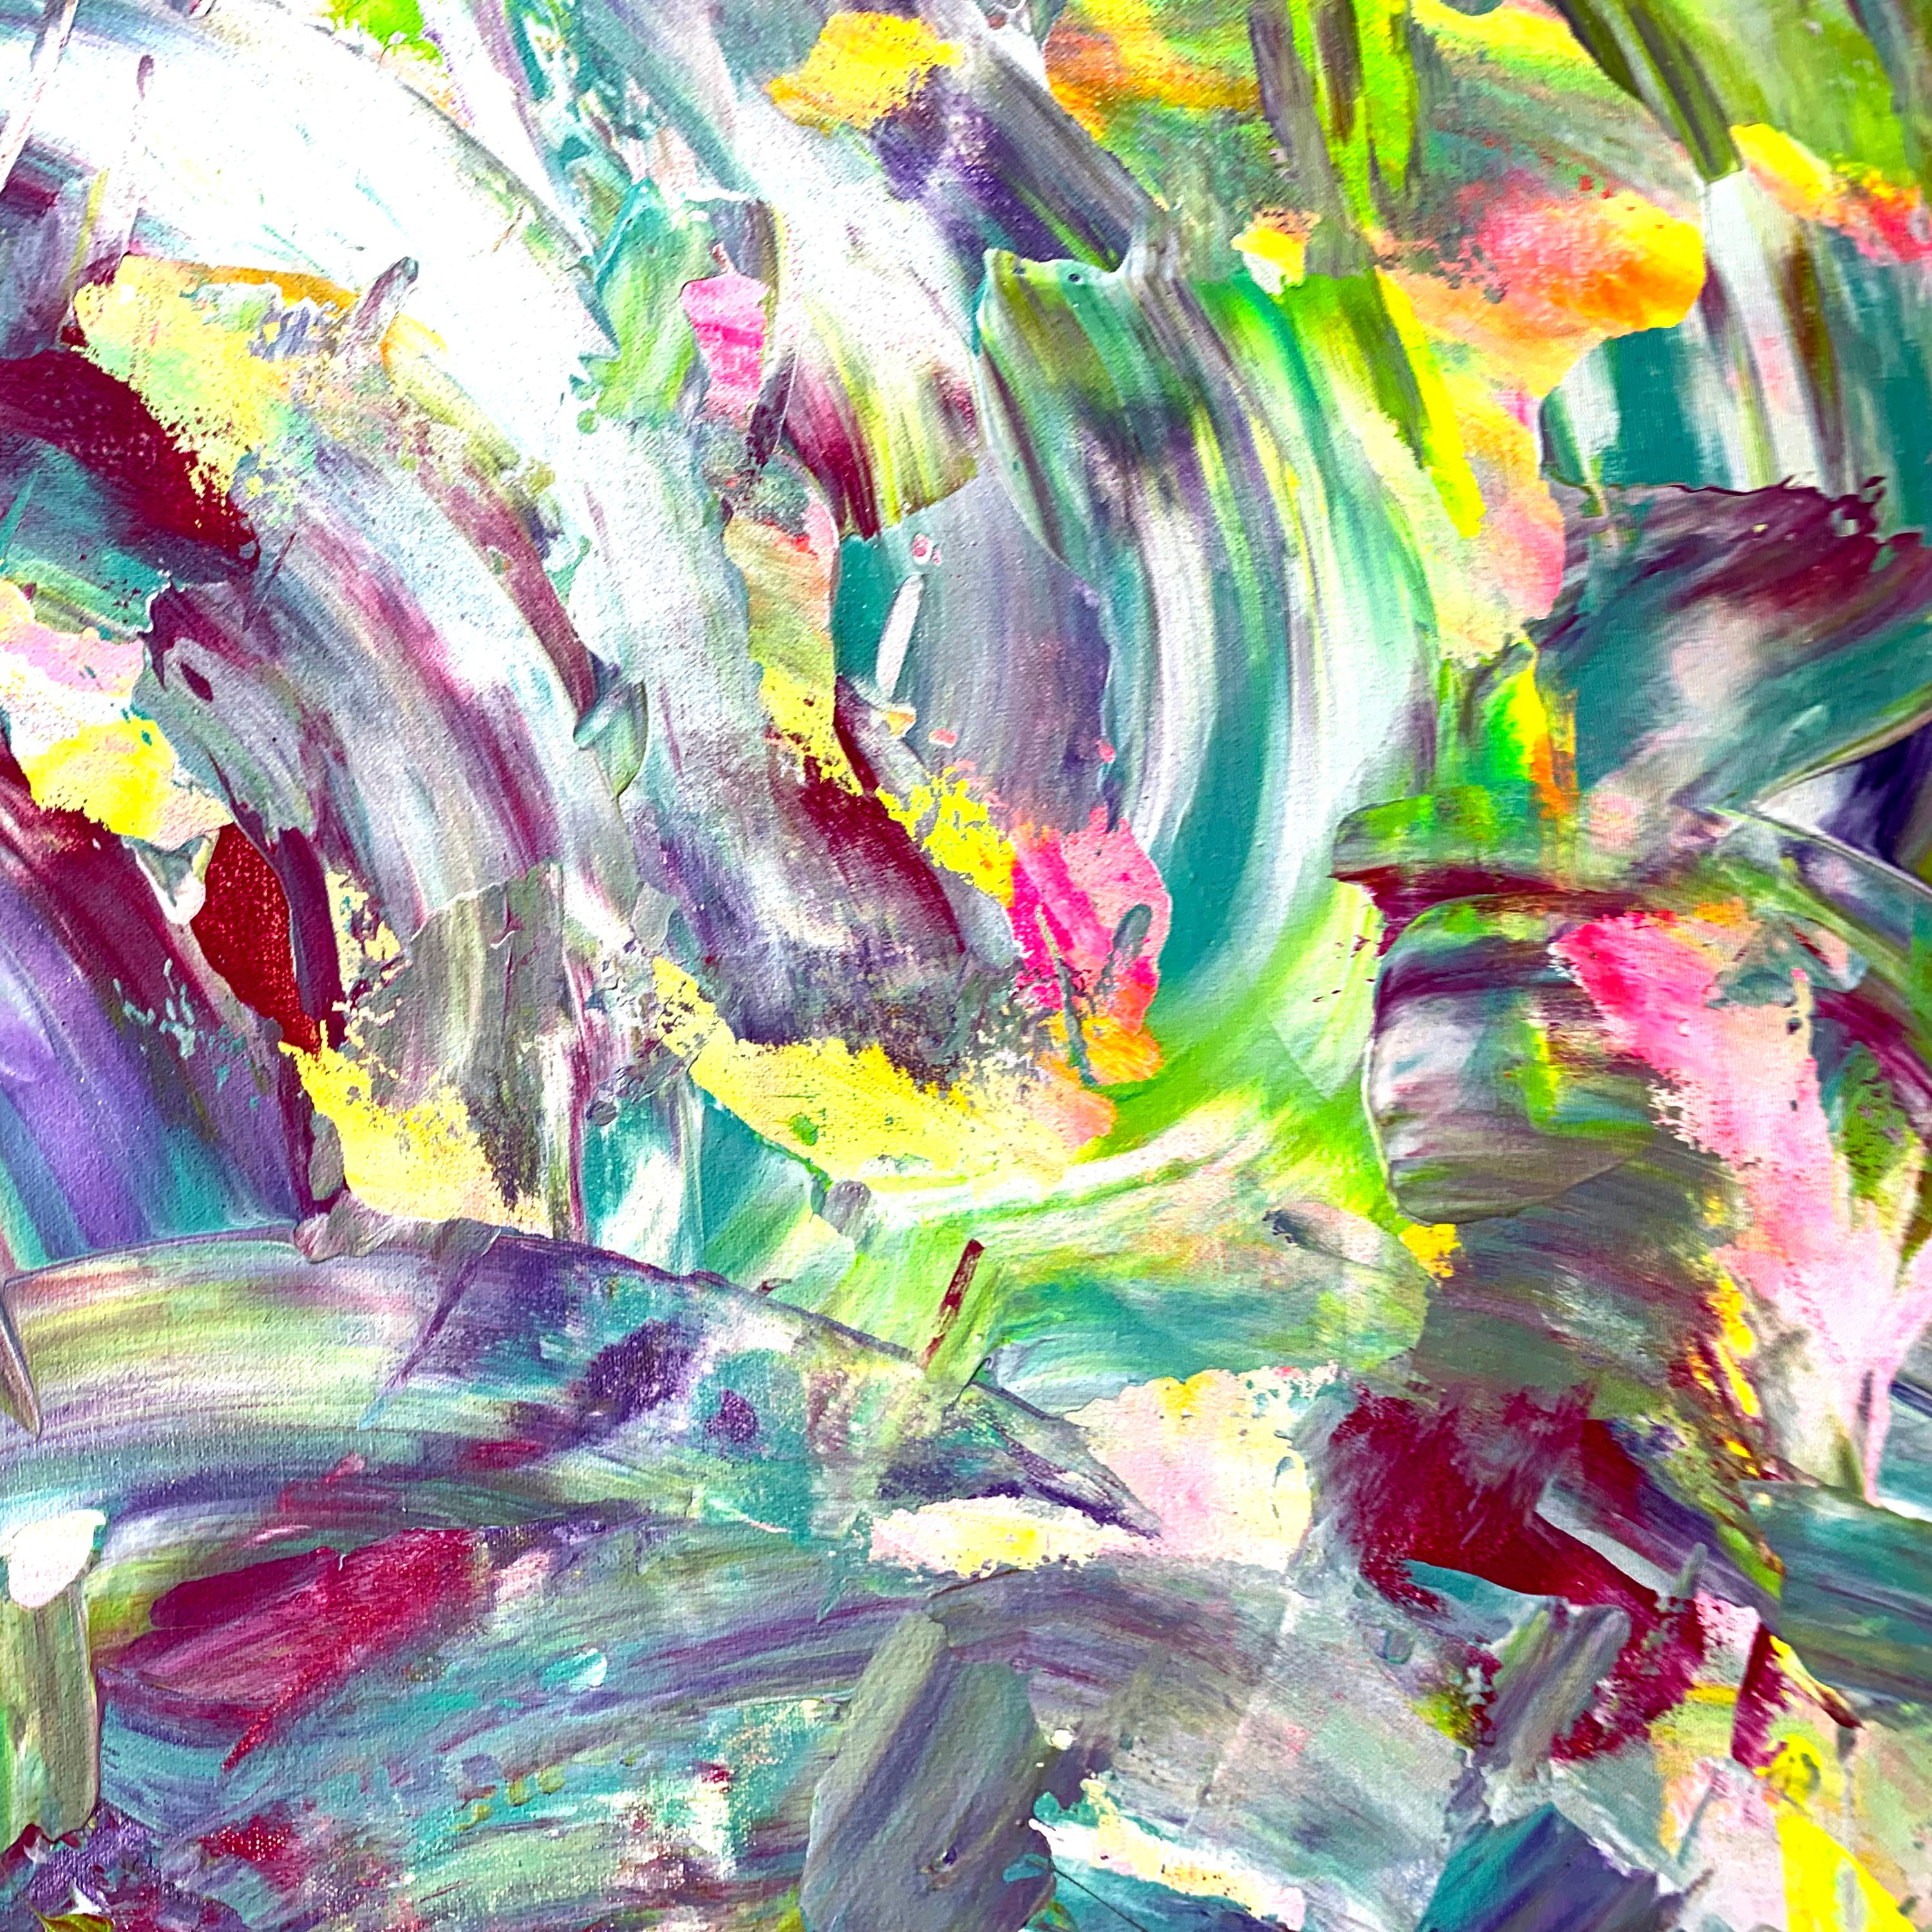 This artwork is how sometimes, something moves with you. In certain situations it feels like quite a bit moves with us from day to day. When you feel this, there is a harmony in one's life. This work is painted in the style of abstract